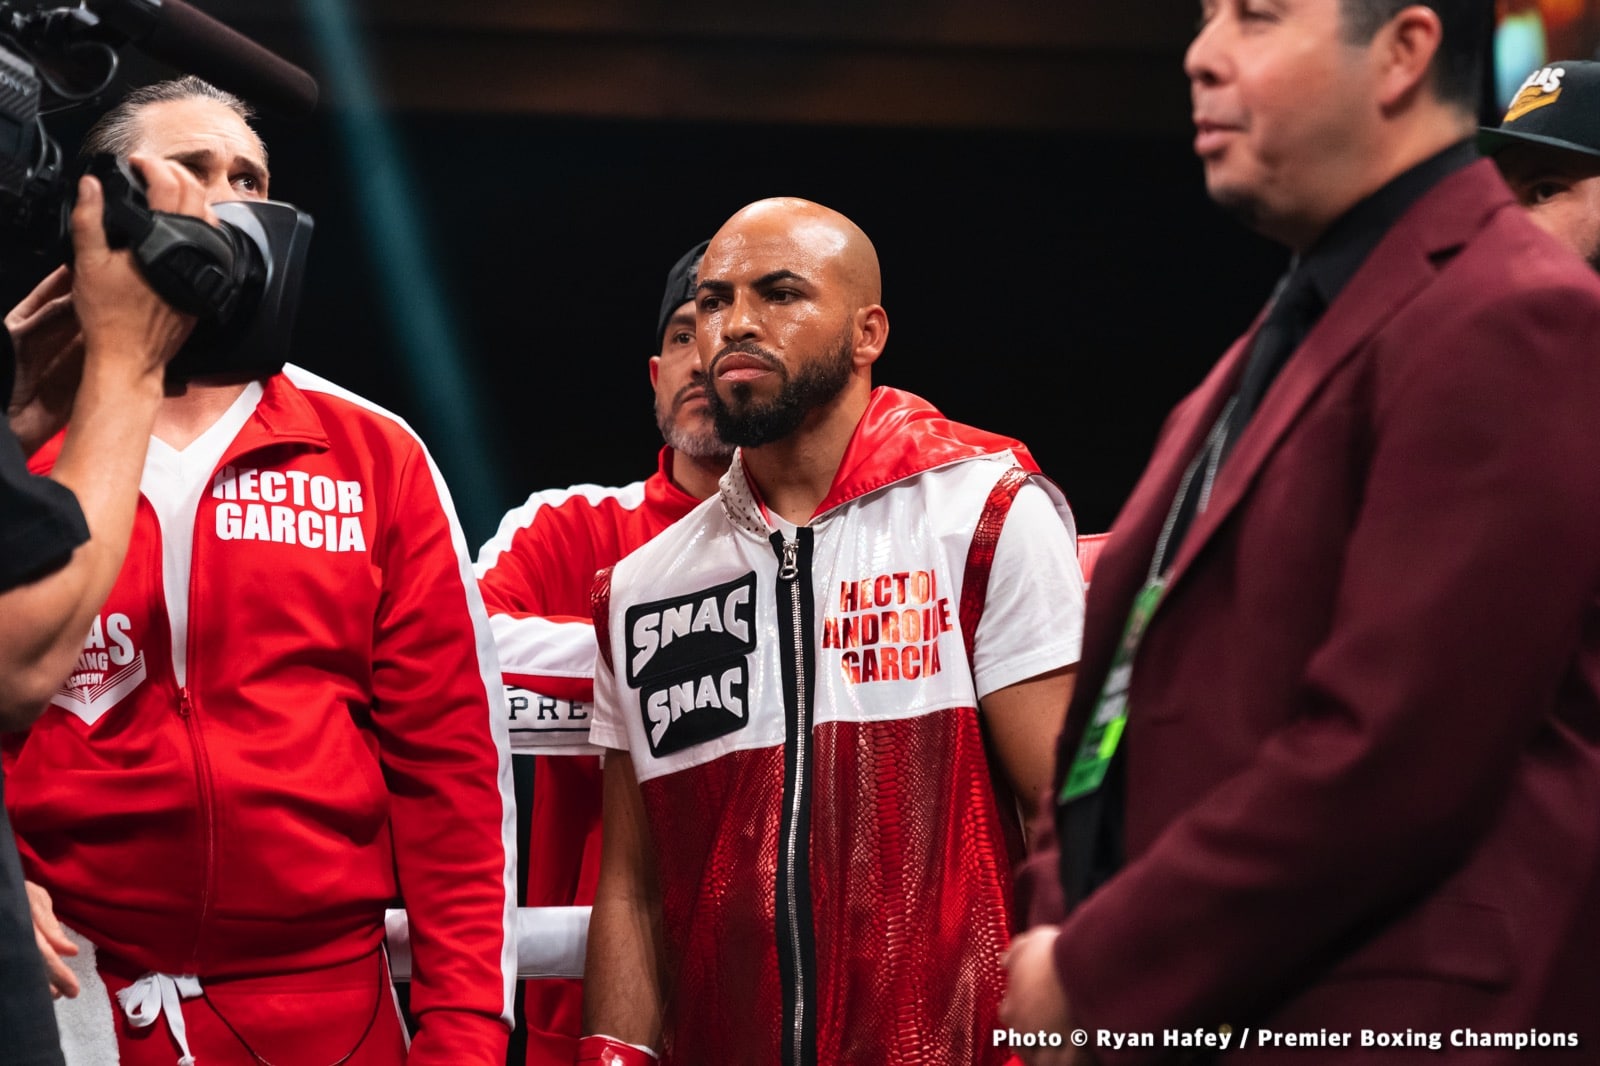 Hector Garcia defeats Colbert; Russell stops Postol - Boxing Results